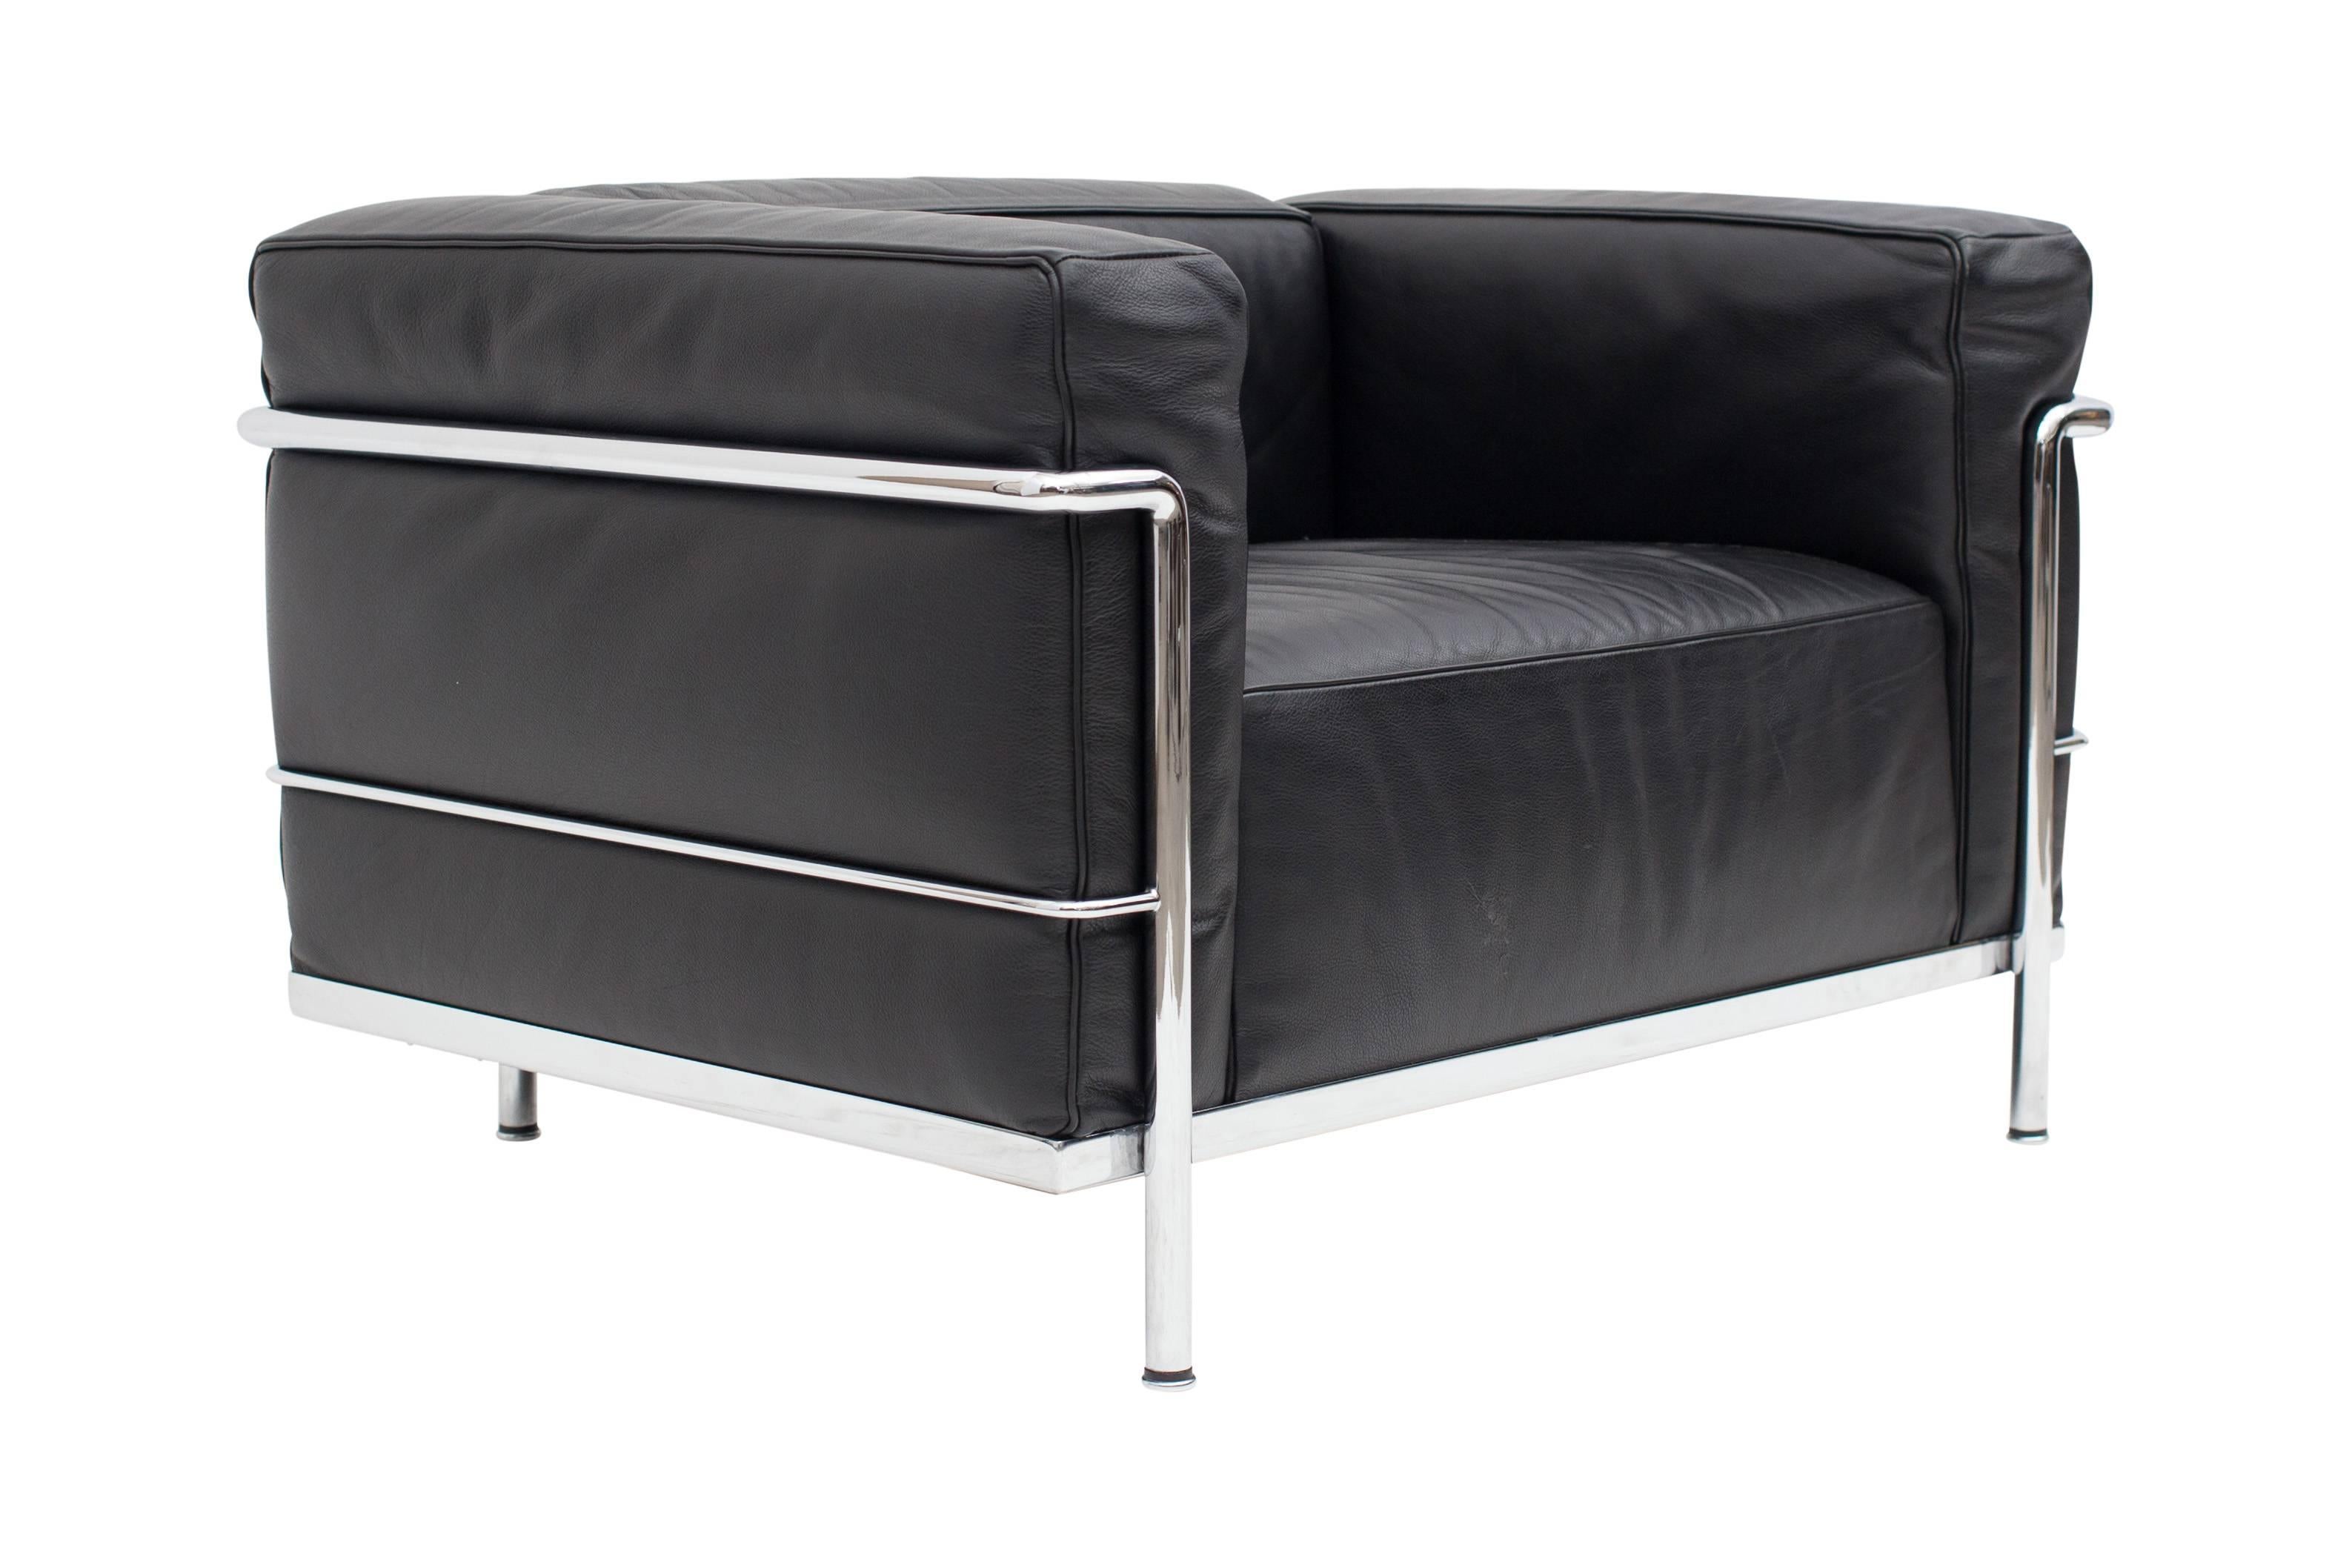 Designer: Le Corbusier, Pierre Jeanneret, Charlotte Perriand
fauteuil Grand Confort, grand modèle

I Maestri

Year of design: 1928
Year of production: 1965

Four black leather unconnected cushions, enclosed in a chrome steel tube